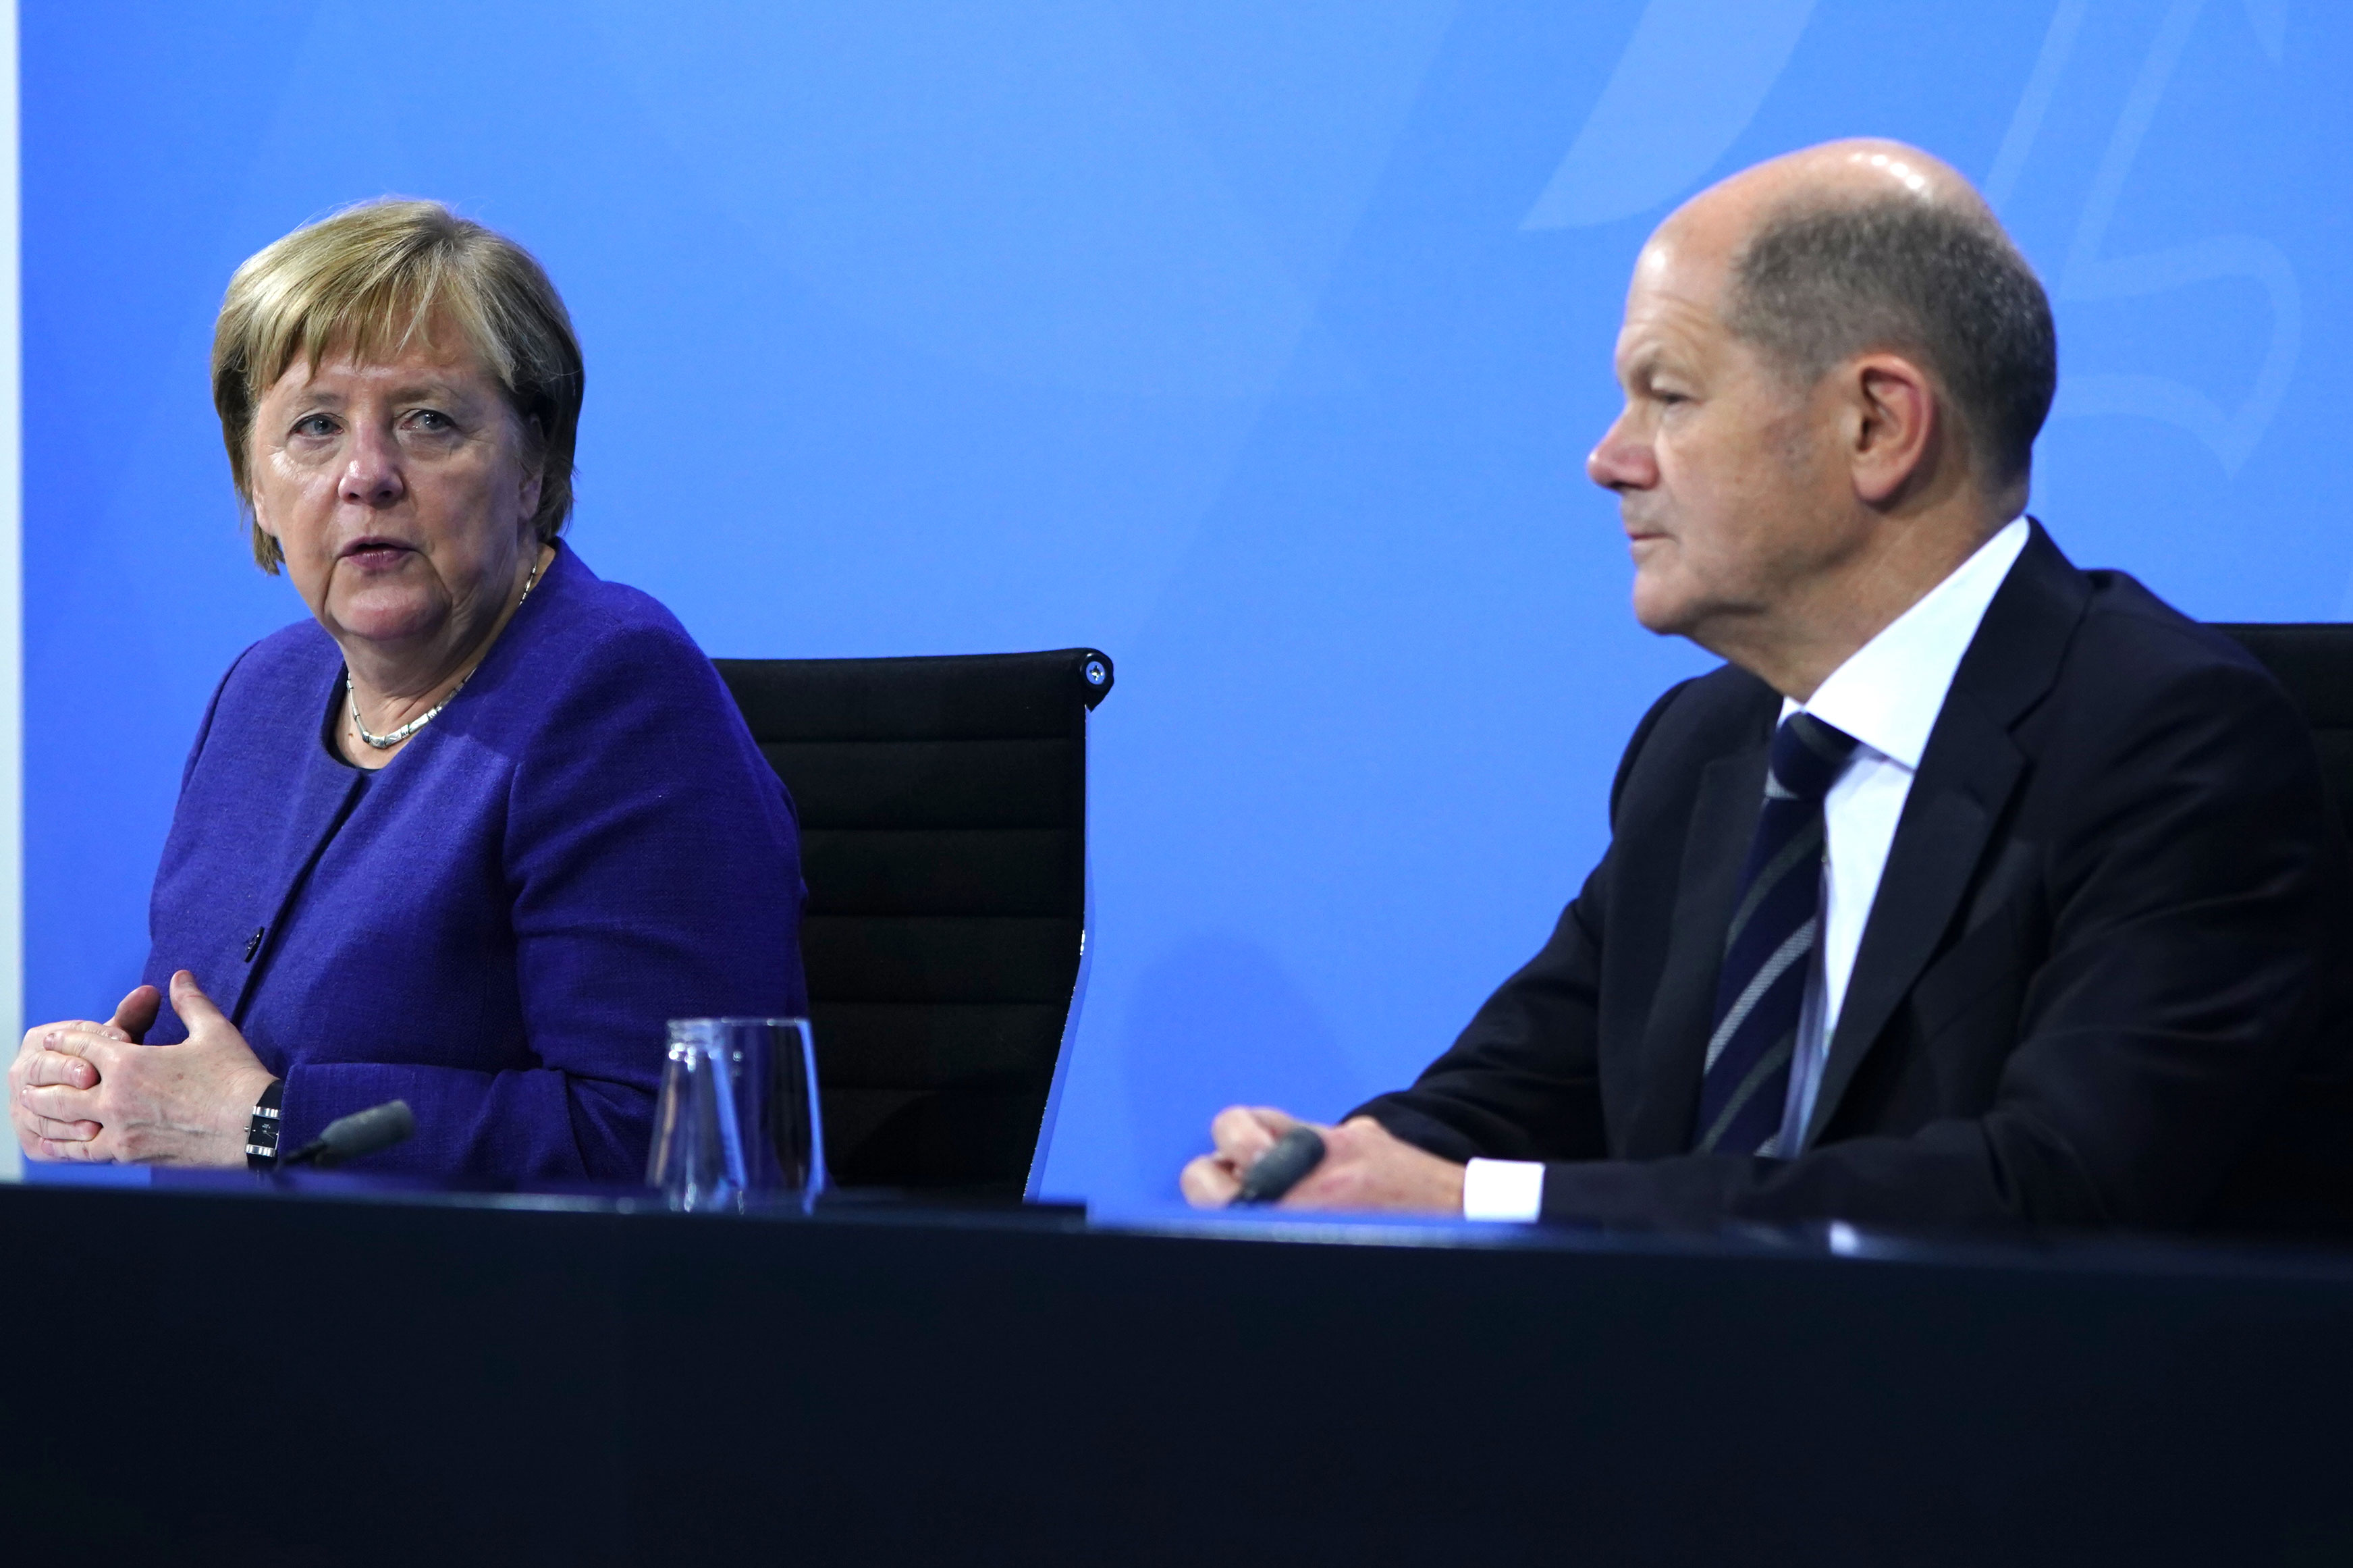 Acting Federal Chancellor Angela Merkel and acting German Minister of Finance Olaf Scholz during a press conference after a meeting on the current coronavirus situation on November 18, 2021 in Berlin.